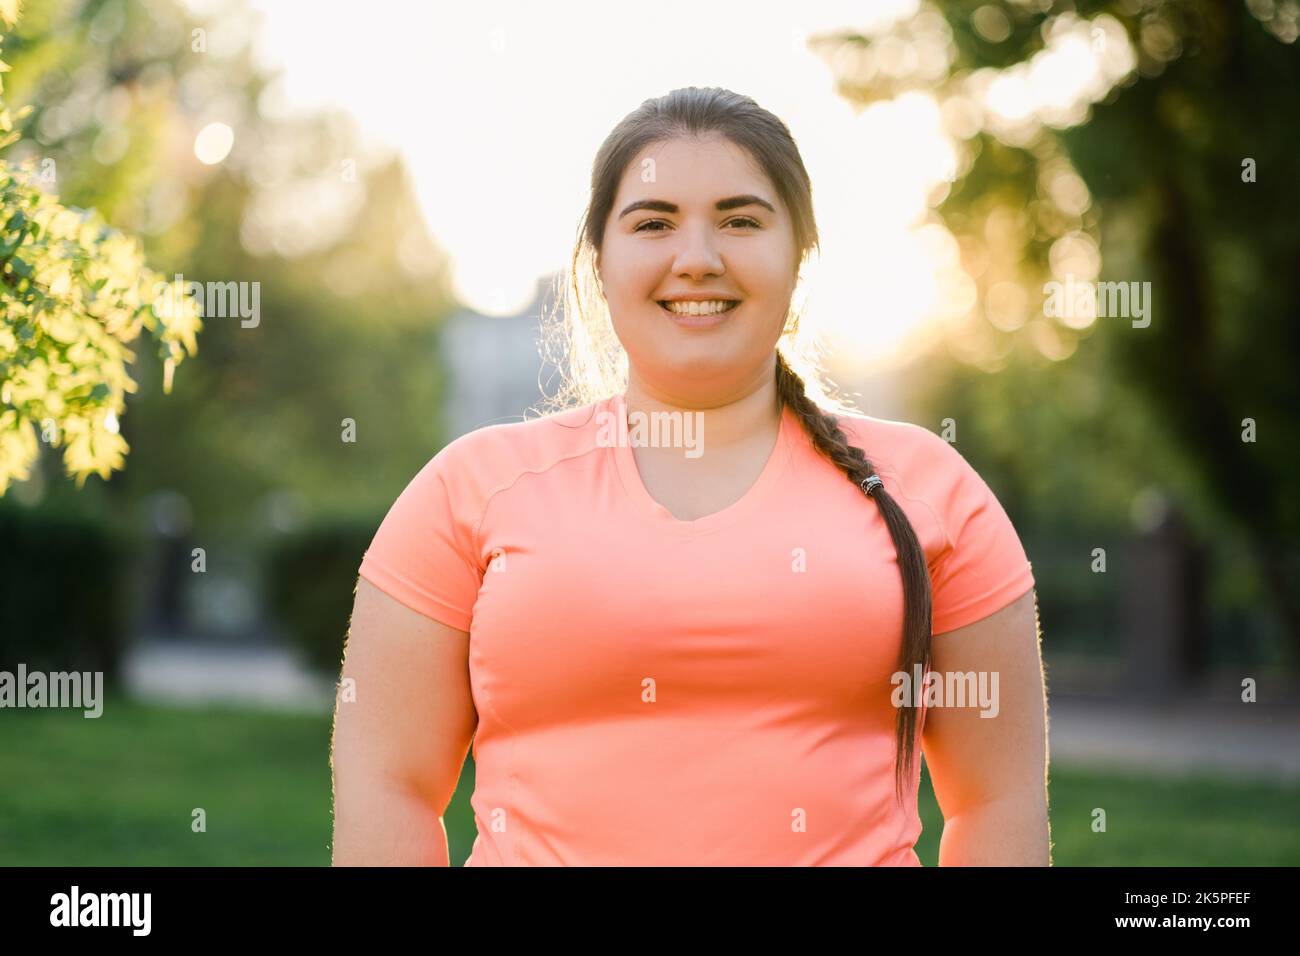 happy woman body positive overweight summer park Stock Photo